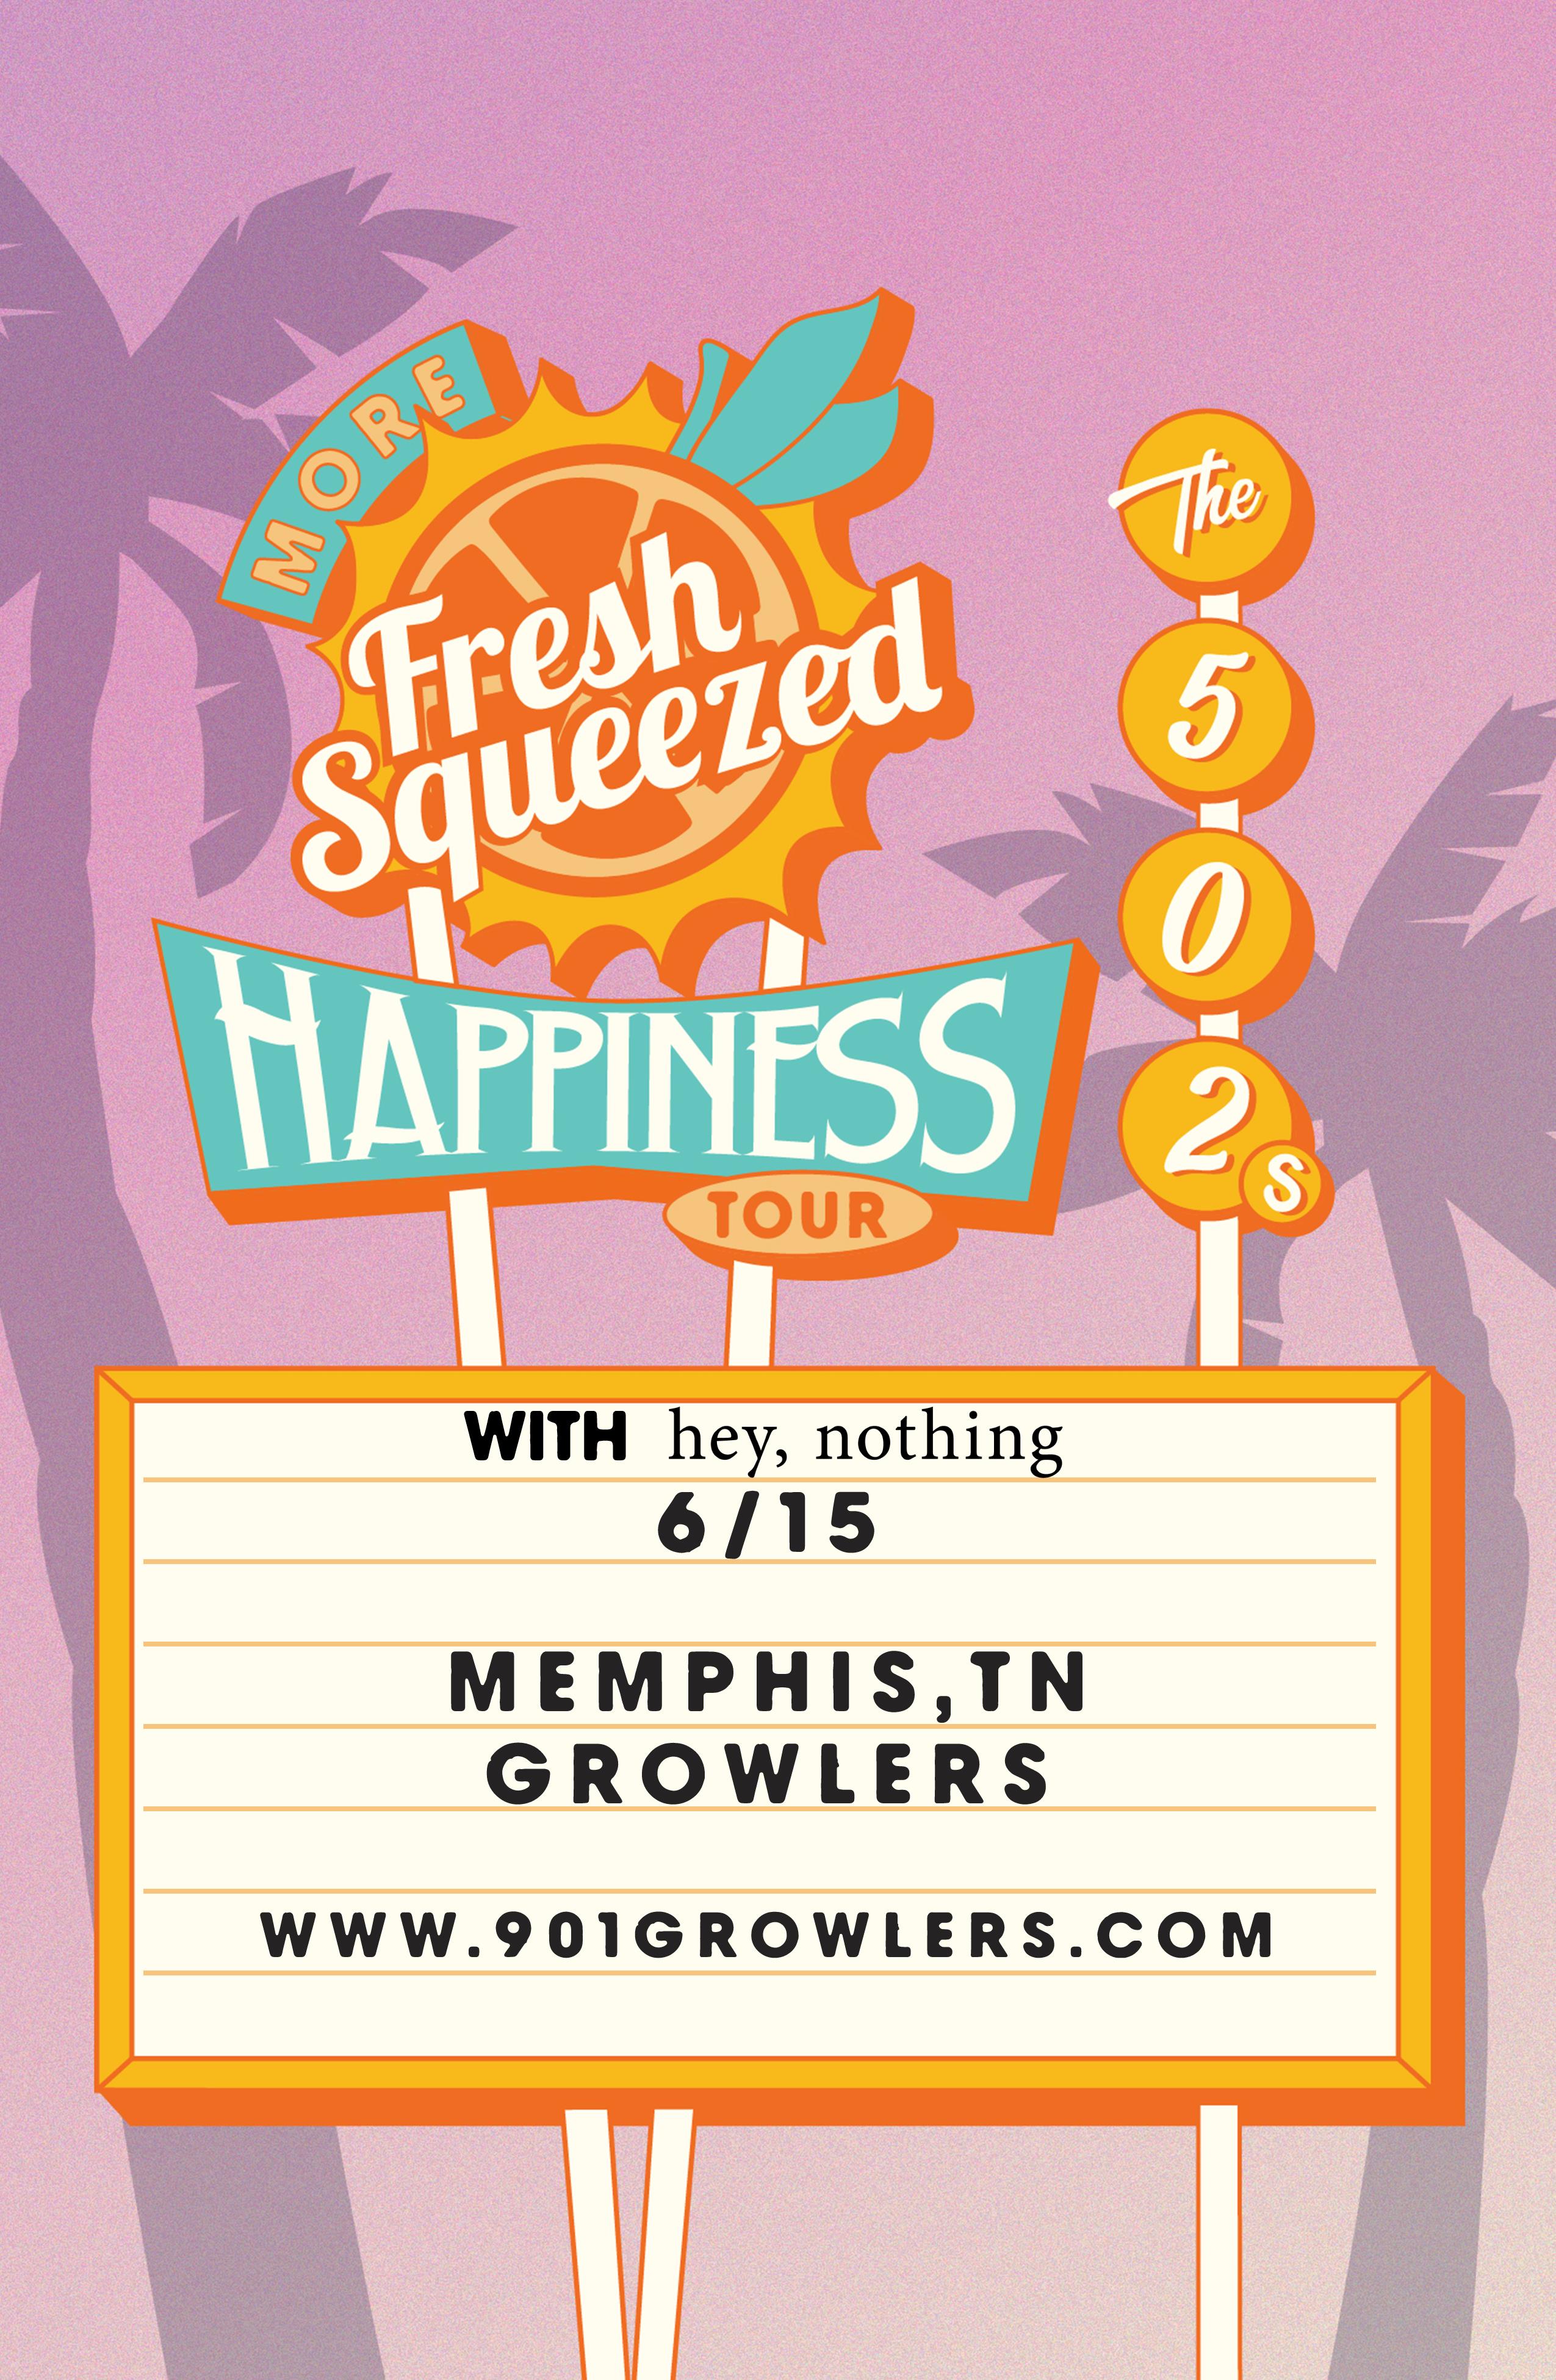 fresh squeezed happiness tour